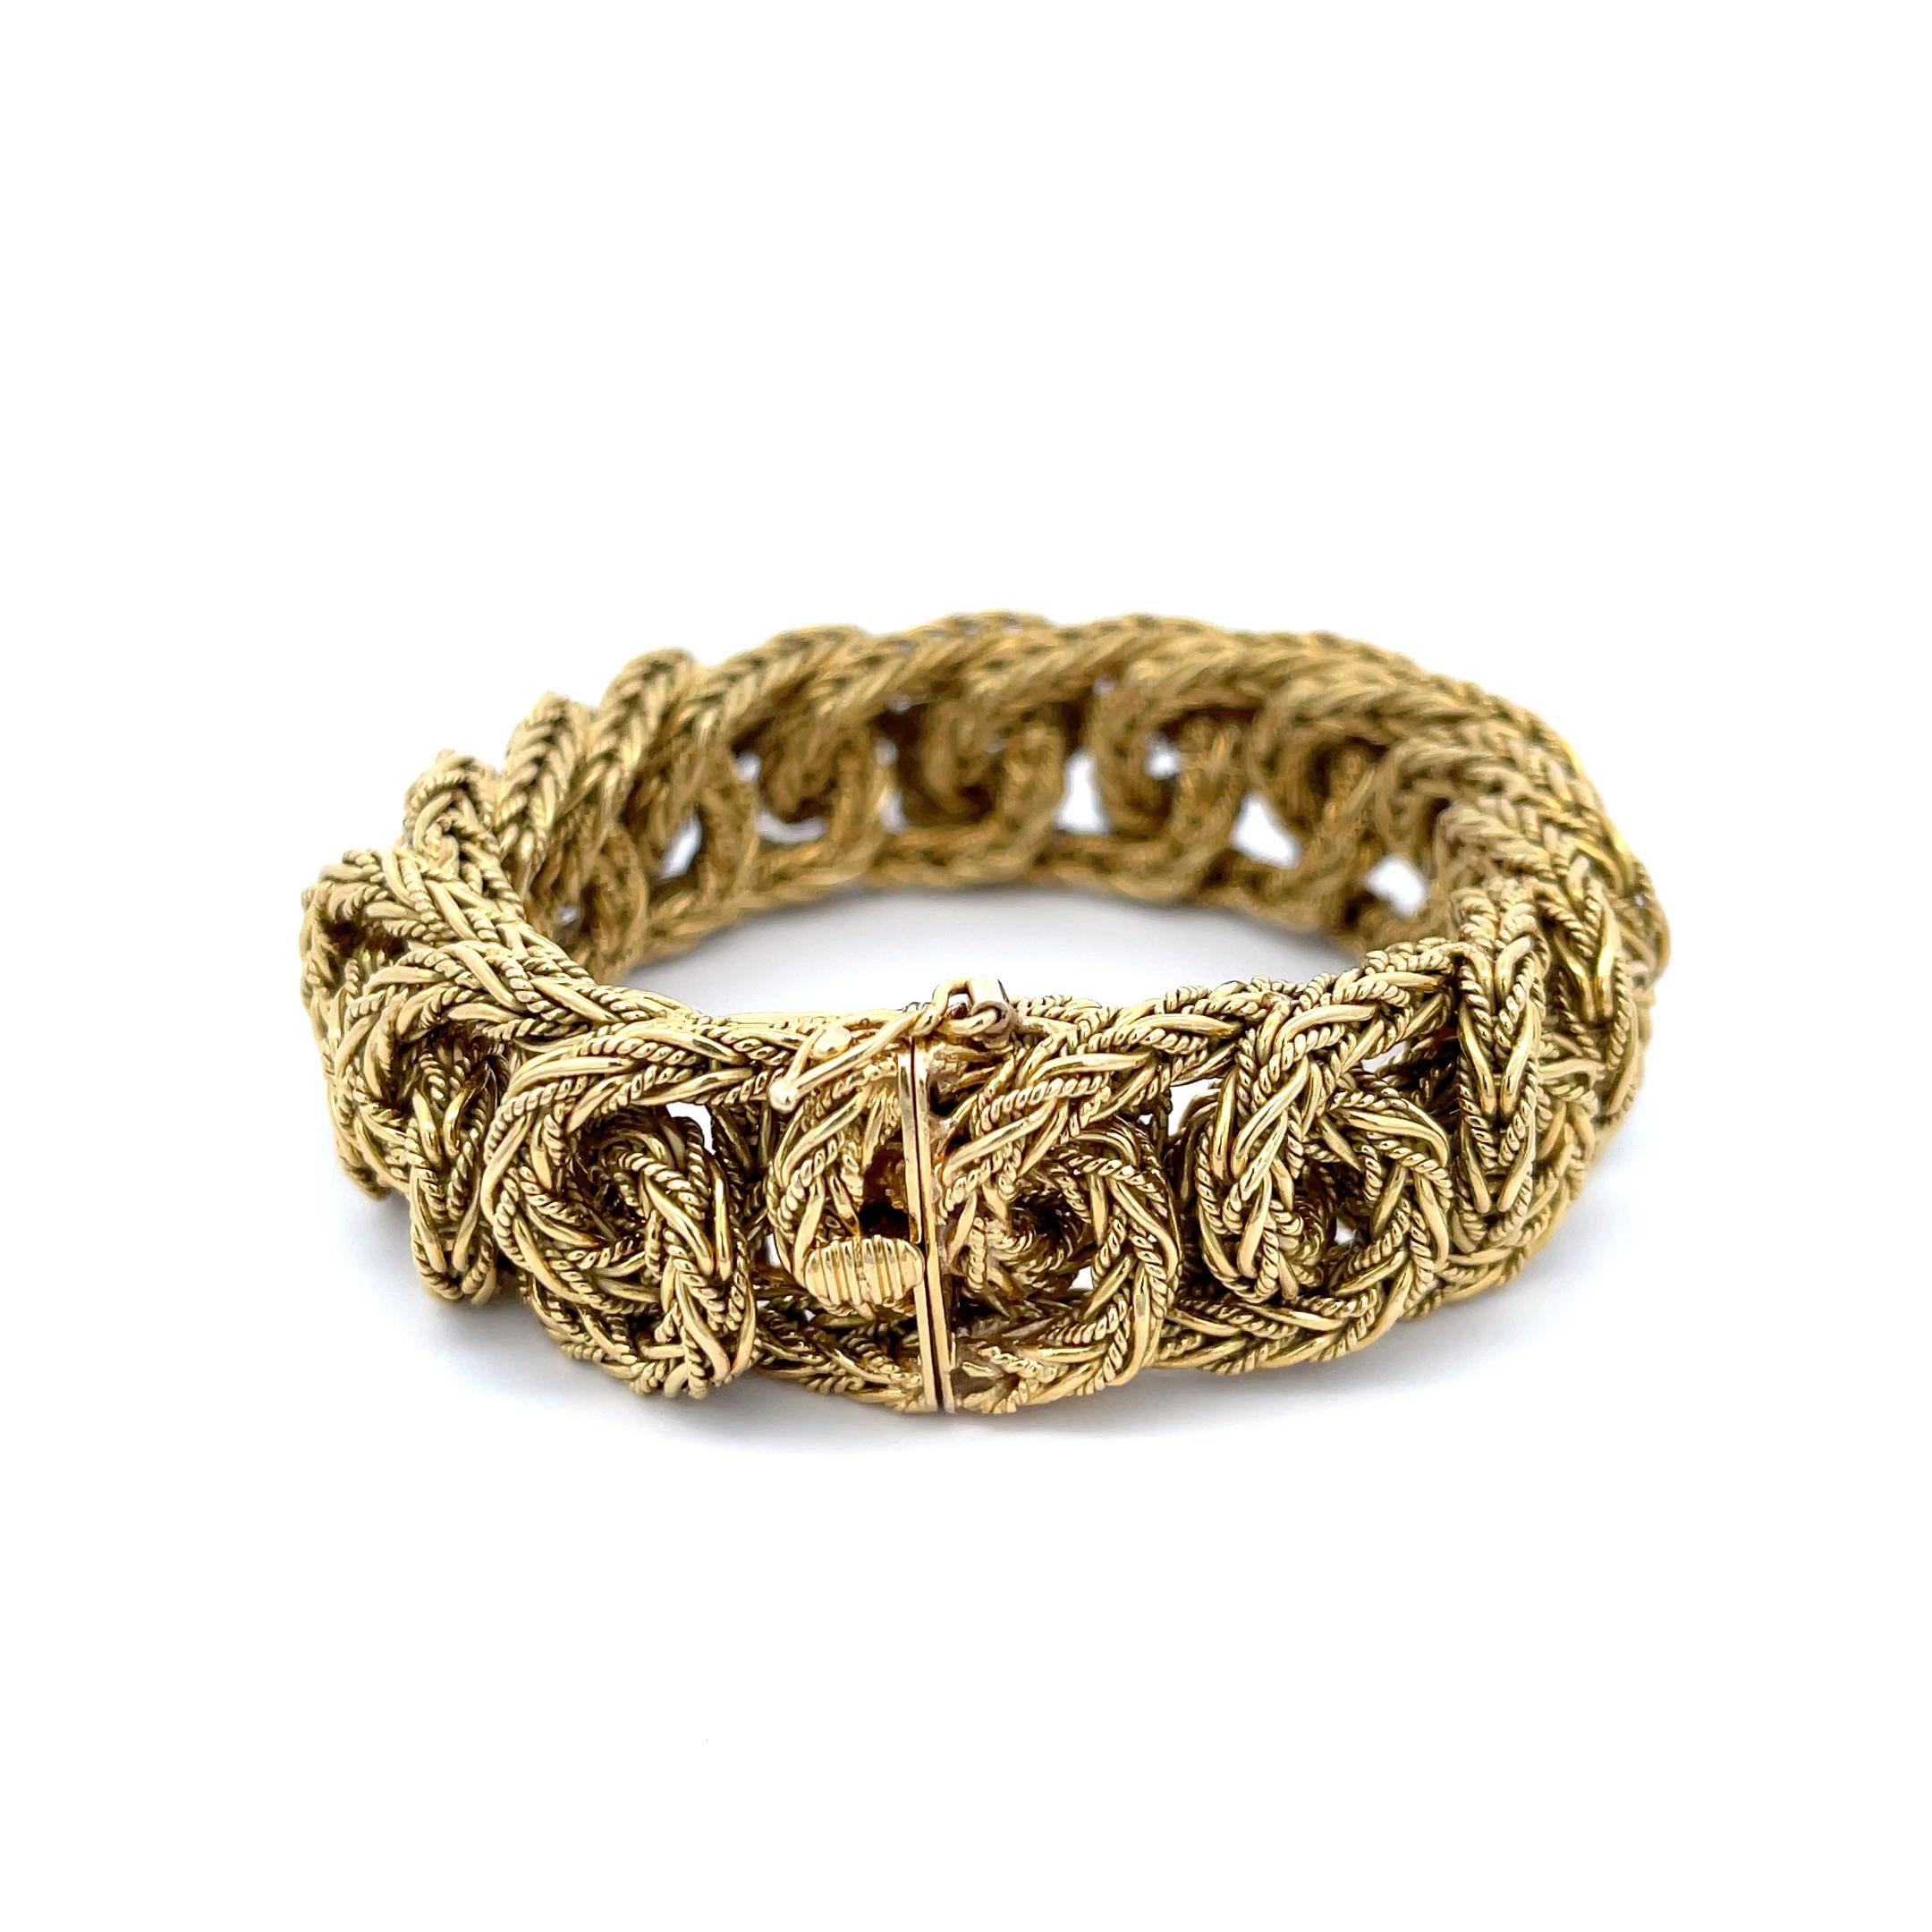 Estate Tiffany & Co. Vintage Braided Link Bracelet in 18K Yellow Gold. This rare bracelet features a hidden claps with a figure eight safety latch, is 7 3/8